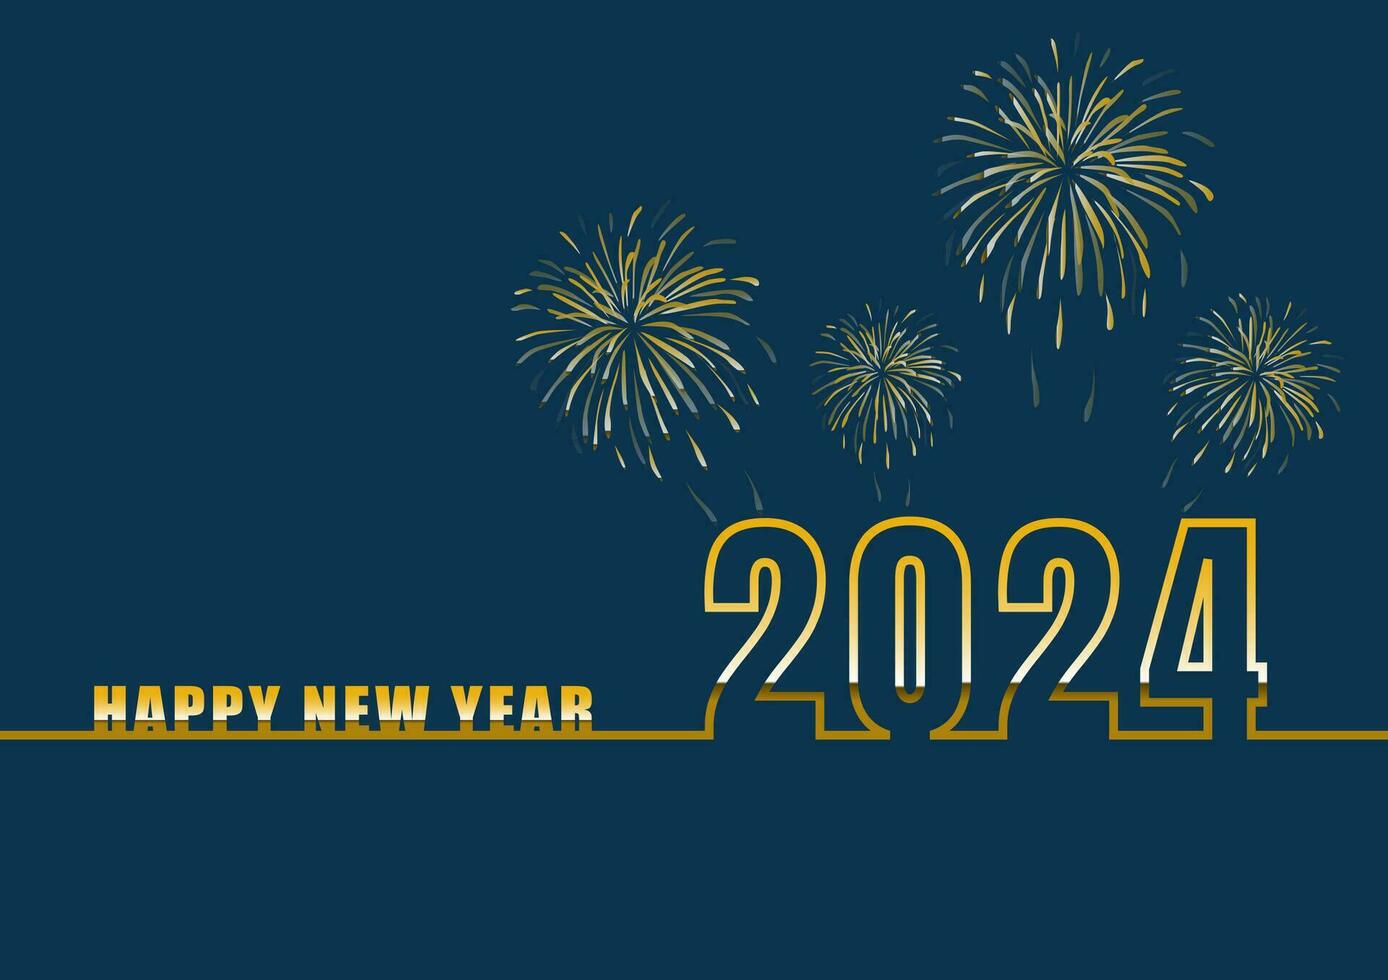 Happy new year 2024 with fireworks vector